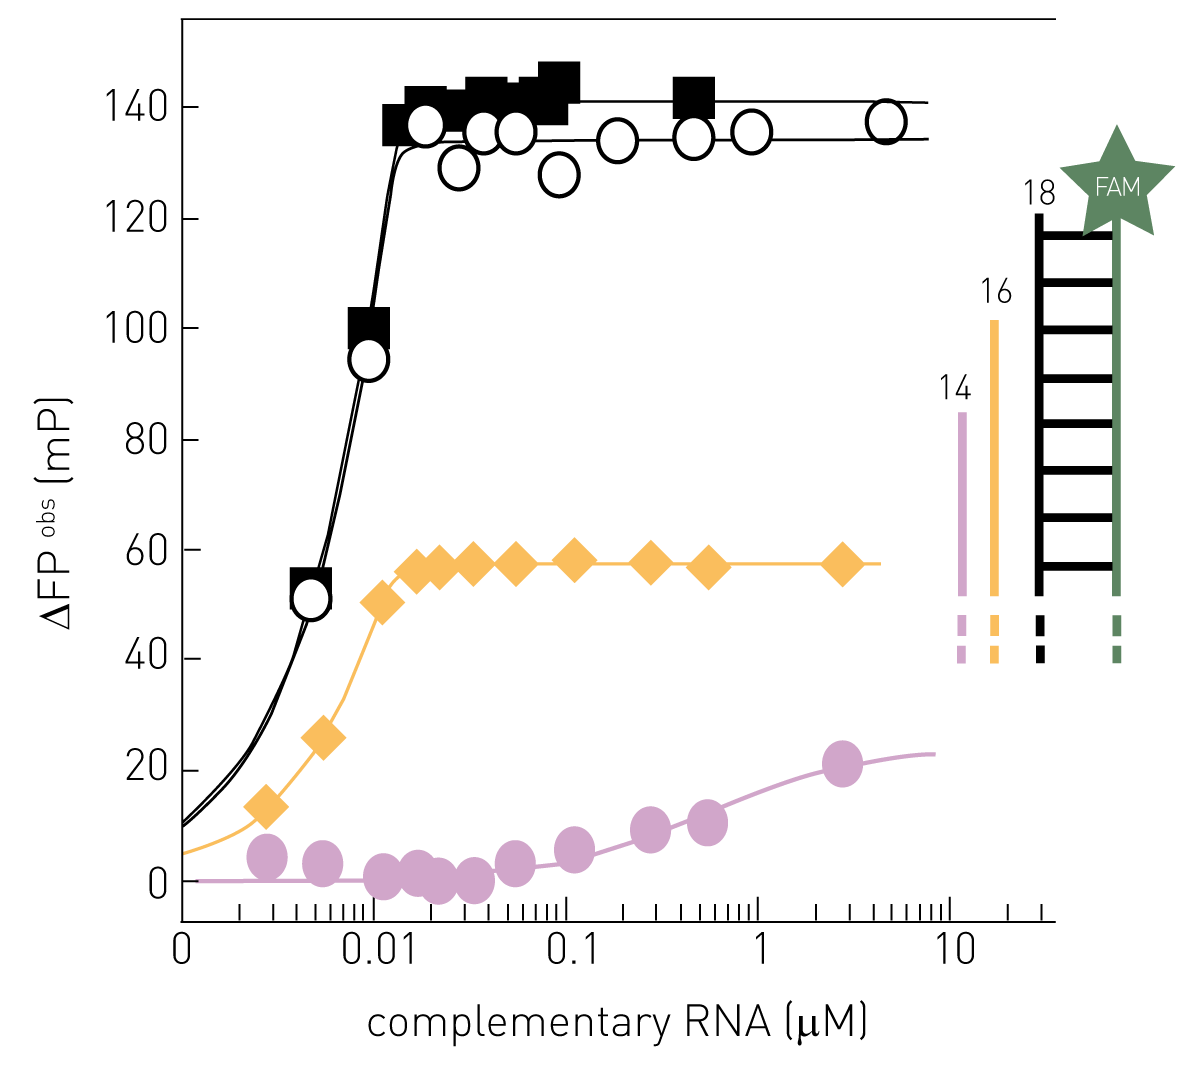 Fig. 2: fluorescence polarization-based RdRP activity detection. A fluorescently labelled single strand RNA (green) functions as a template for RdRP-dependent RNA synthesis. Full length synthesis leads to a larger size of complementary RNA and consequently higher polarization (black line). Lower values are achieved by incomplete RNA synthesis (yellow and purple lines) as consequence of an only partial increase in size. To determine the activity of the RdRP, the fluorescence polarization can be detected on a microplate reader.